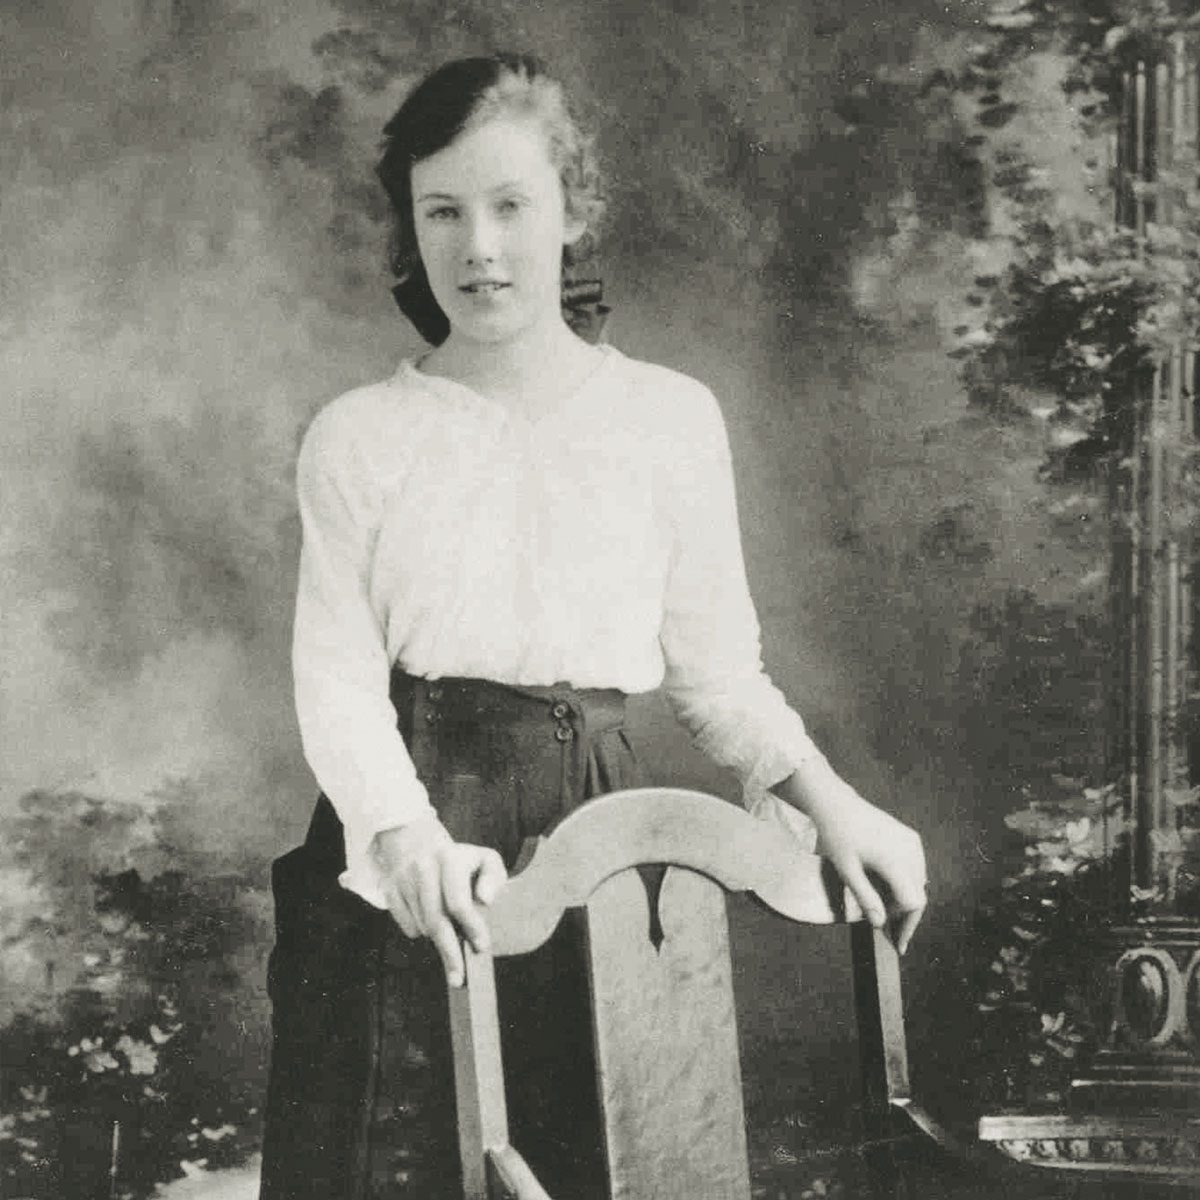 Dorothy May Duncan, aged 14 or 15